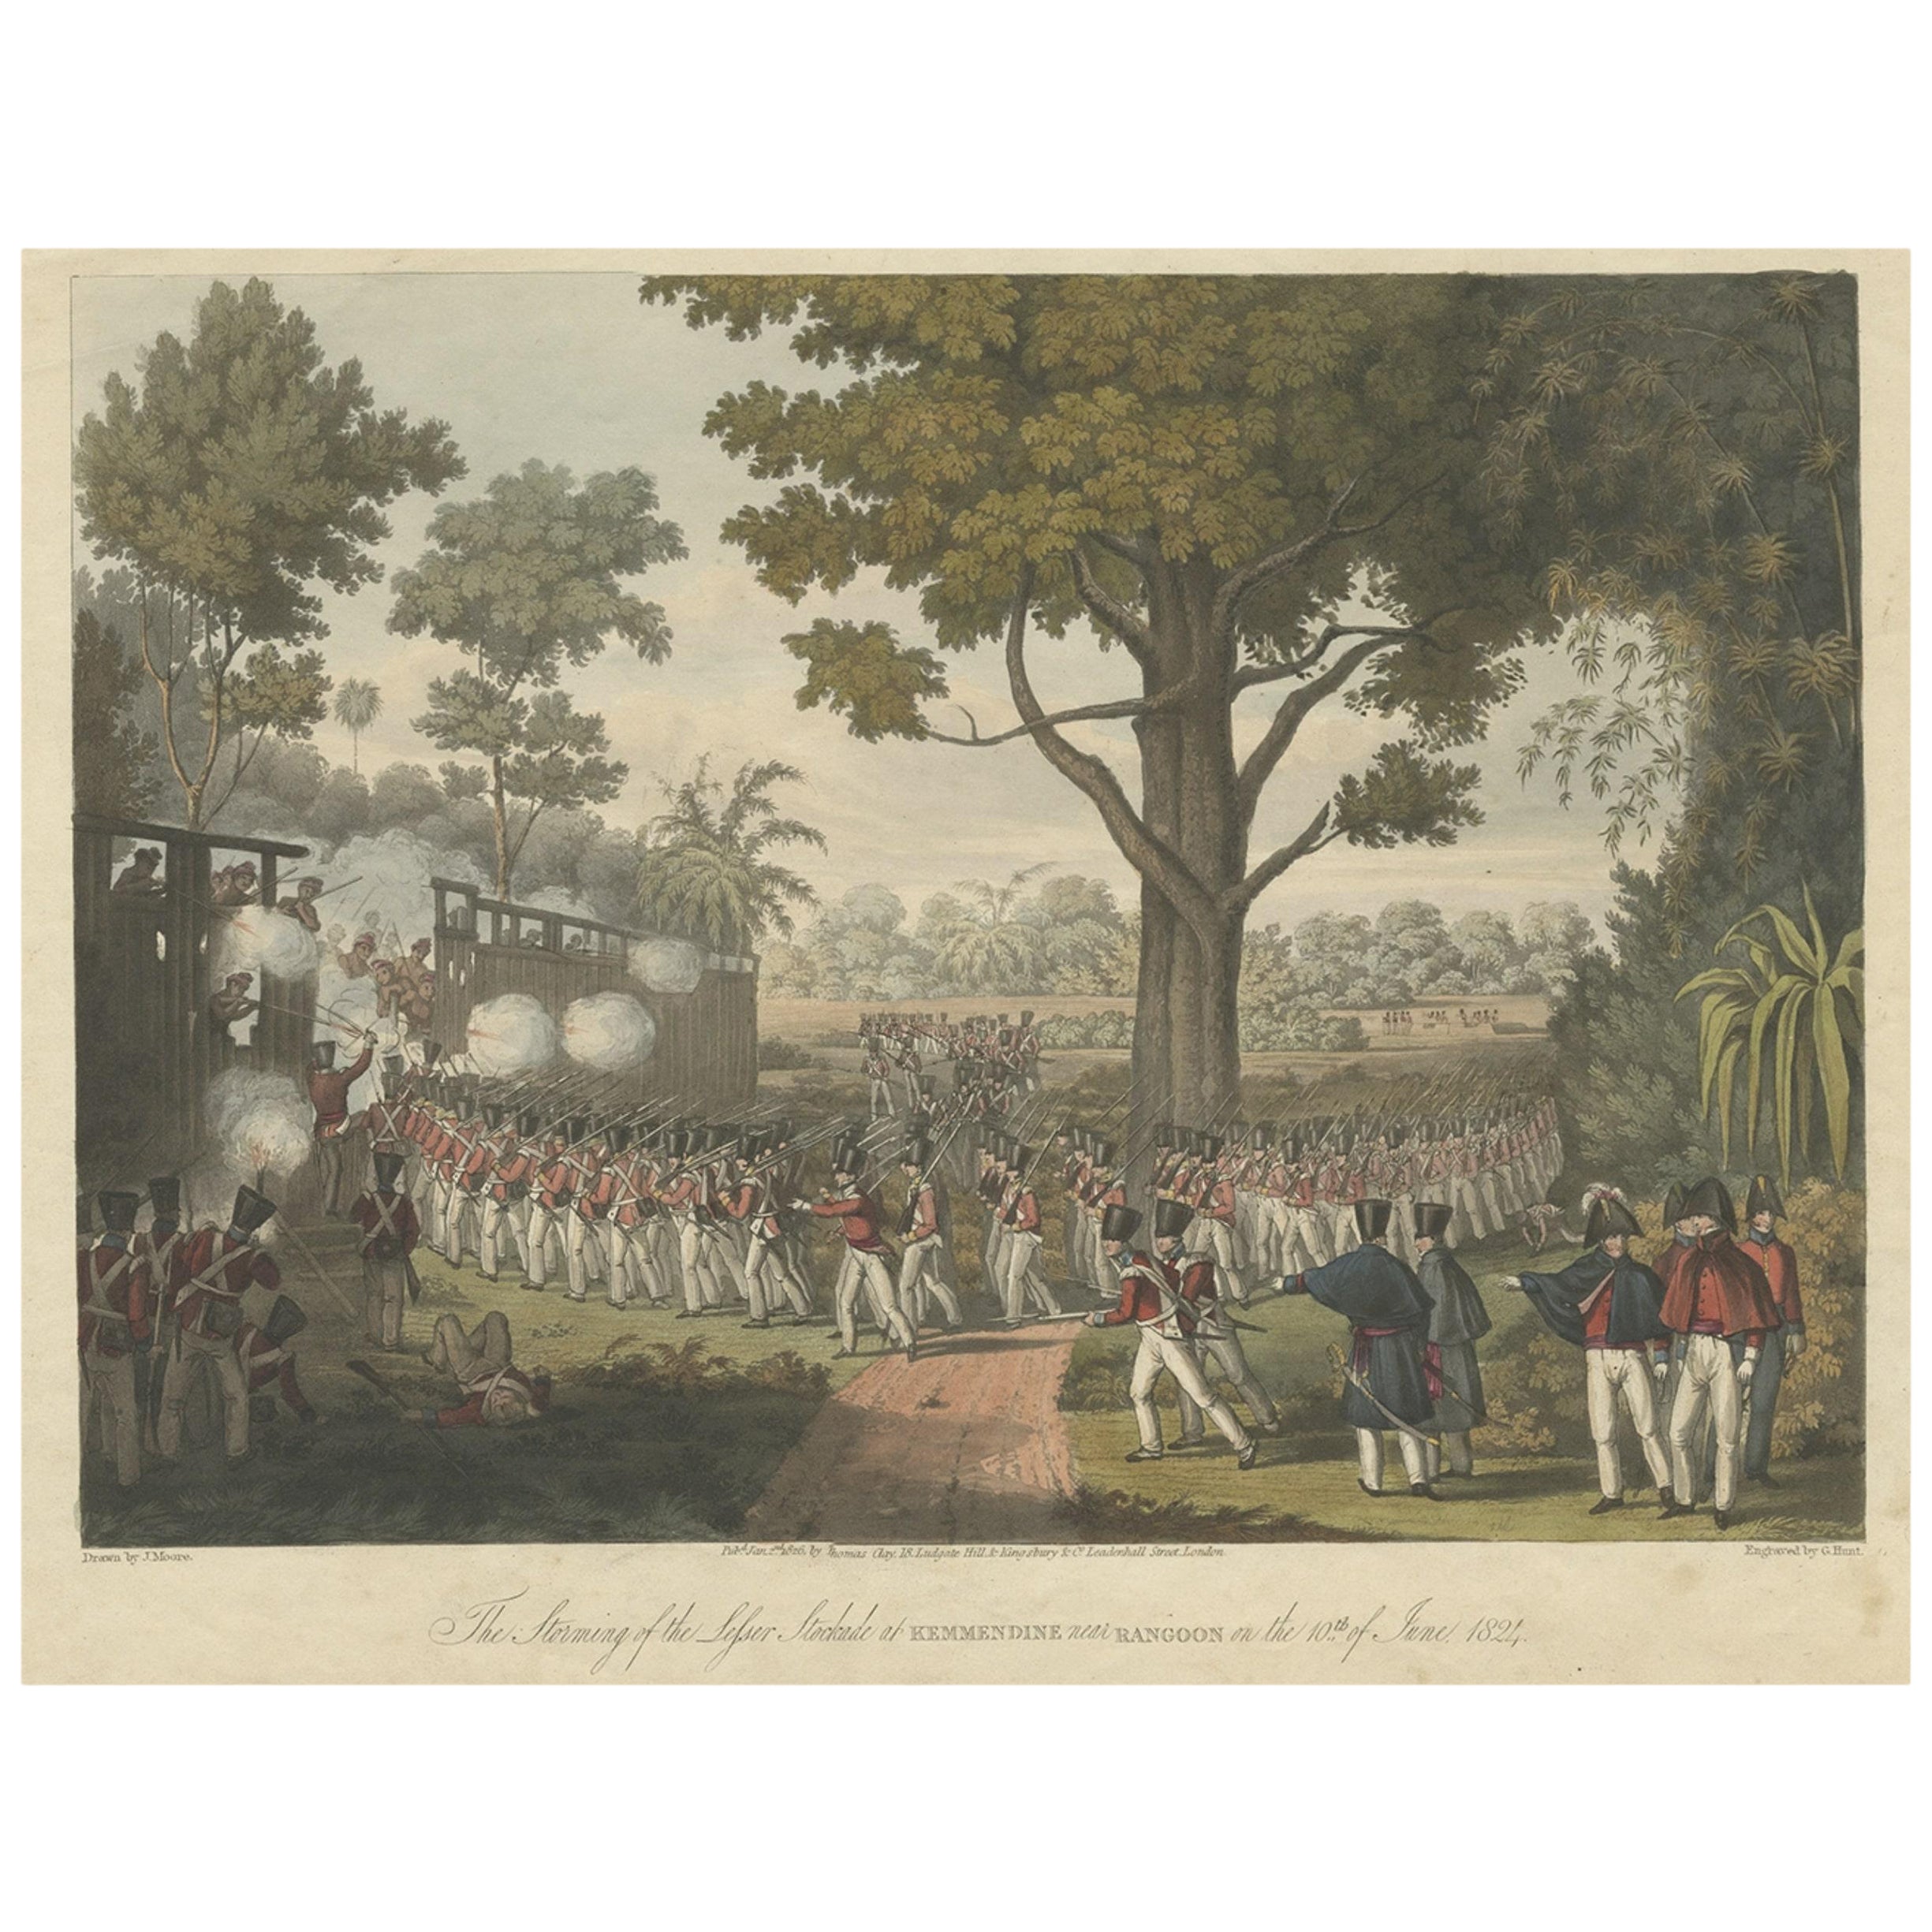 Antique Hand-Colored Print Depicting The Storming of Kemmendine, Rangoon, 1825